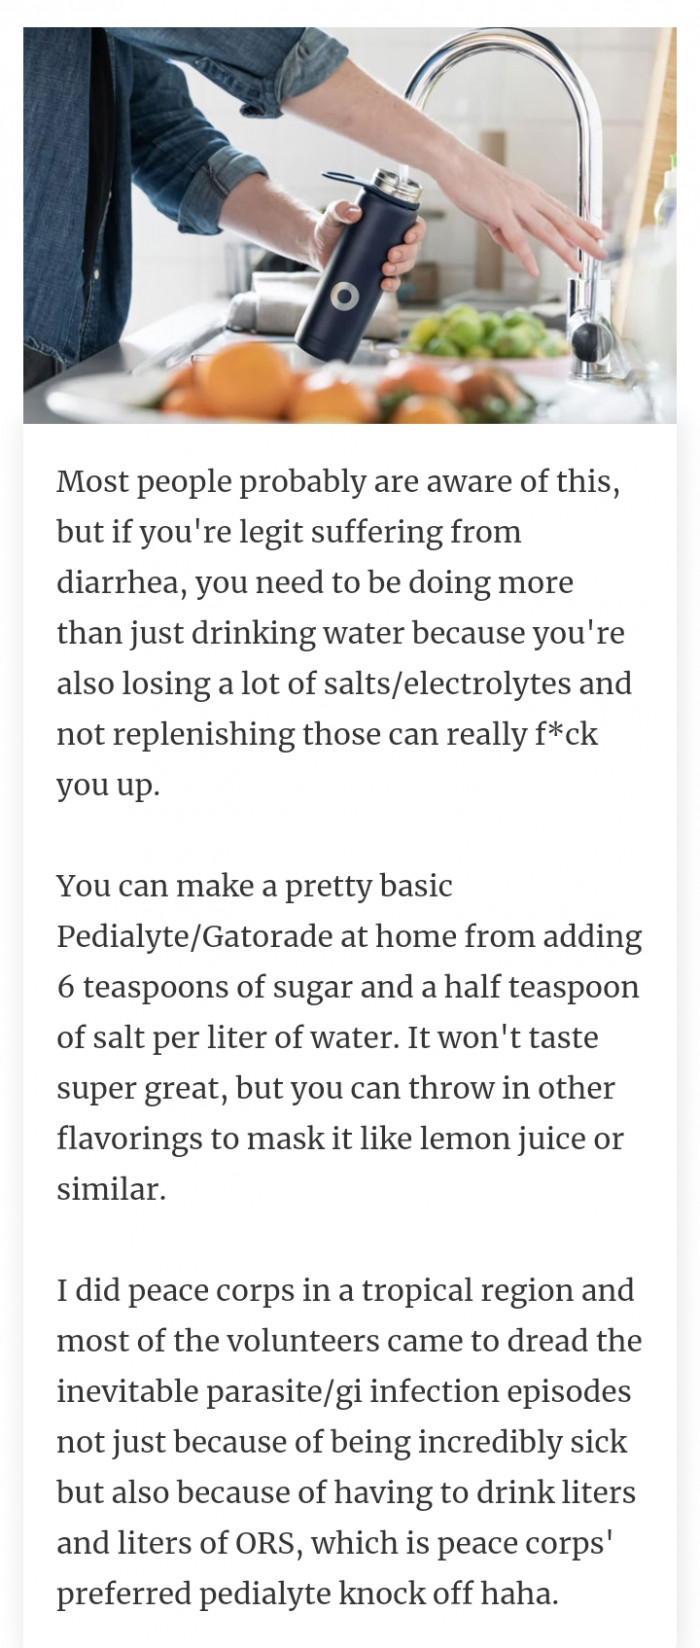 #10 Get yourself a Pedialyte or Gatorade made at home.